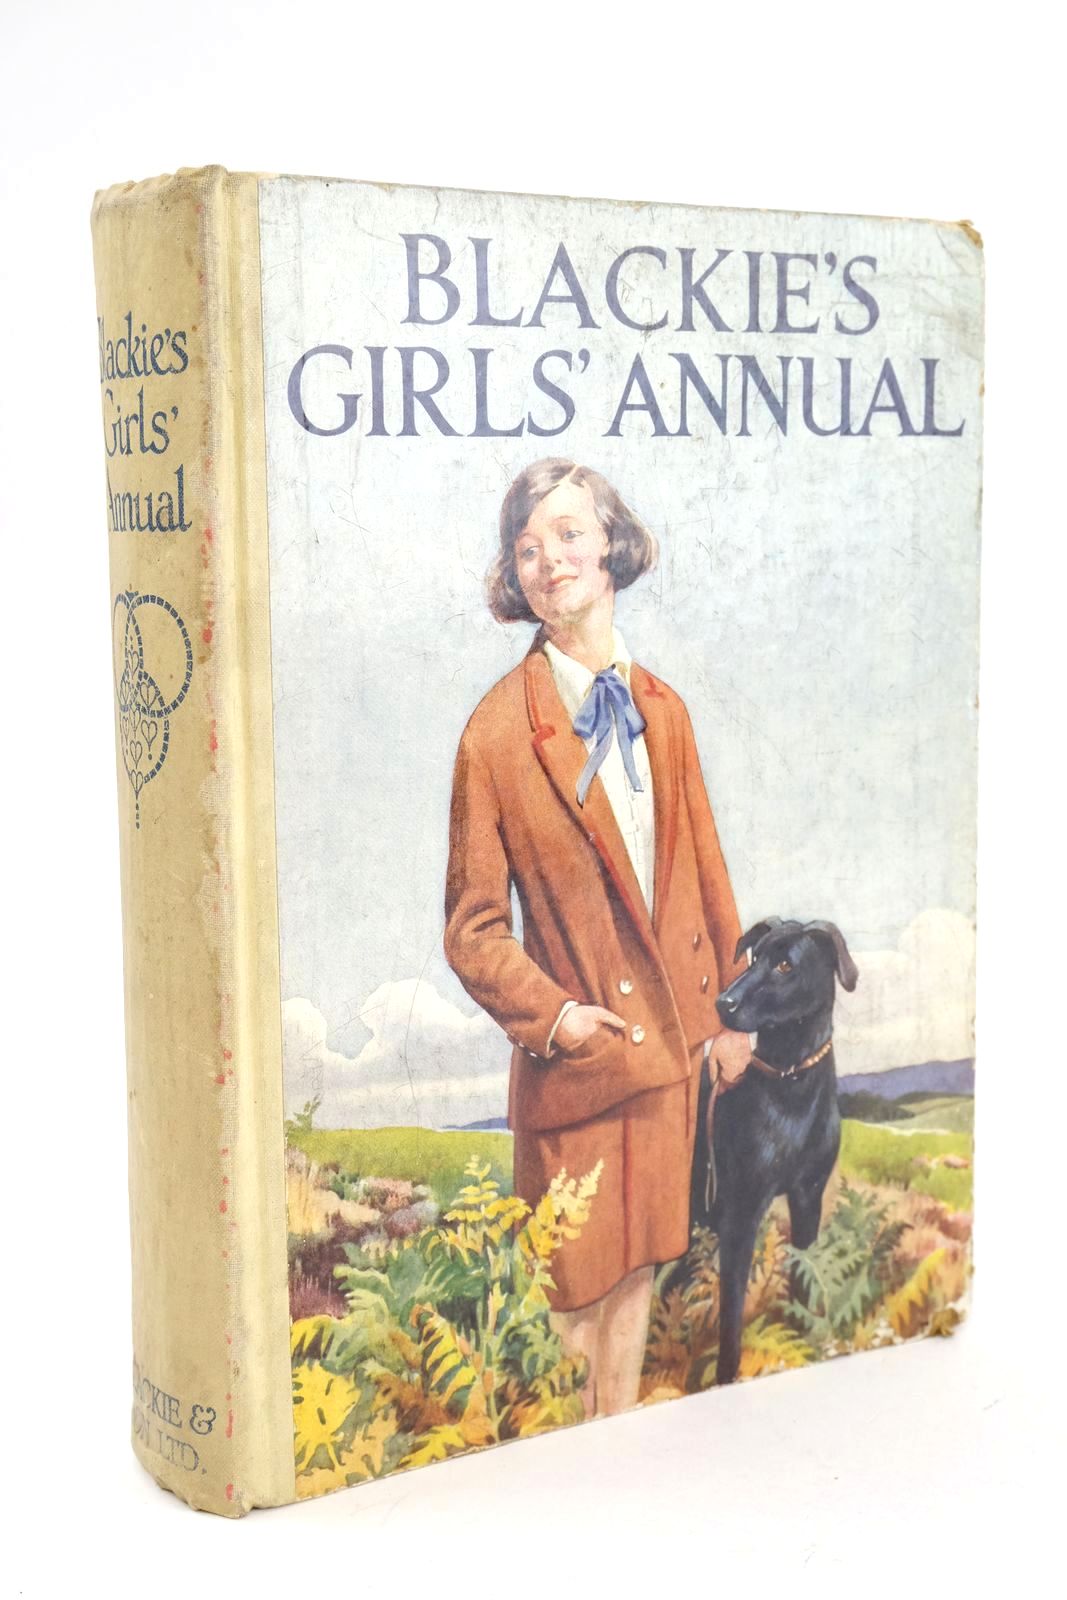 Photo of BLACKIE'S GIRLS' ANNUAL written by Peck, Winifred F.
Harrison, Florence
Rutley, C. Bernard
Brazil, Angela
et al,  illustrated by Brock, C.E.
Harrison, Florence
Cobb, Ruth
et al.,  published by Blackie & Son Ltd. (STOCK CODE: 1324830)  for sale by Stella & Rose's Books